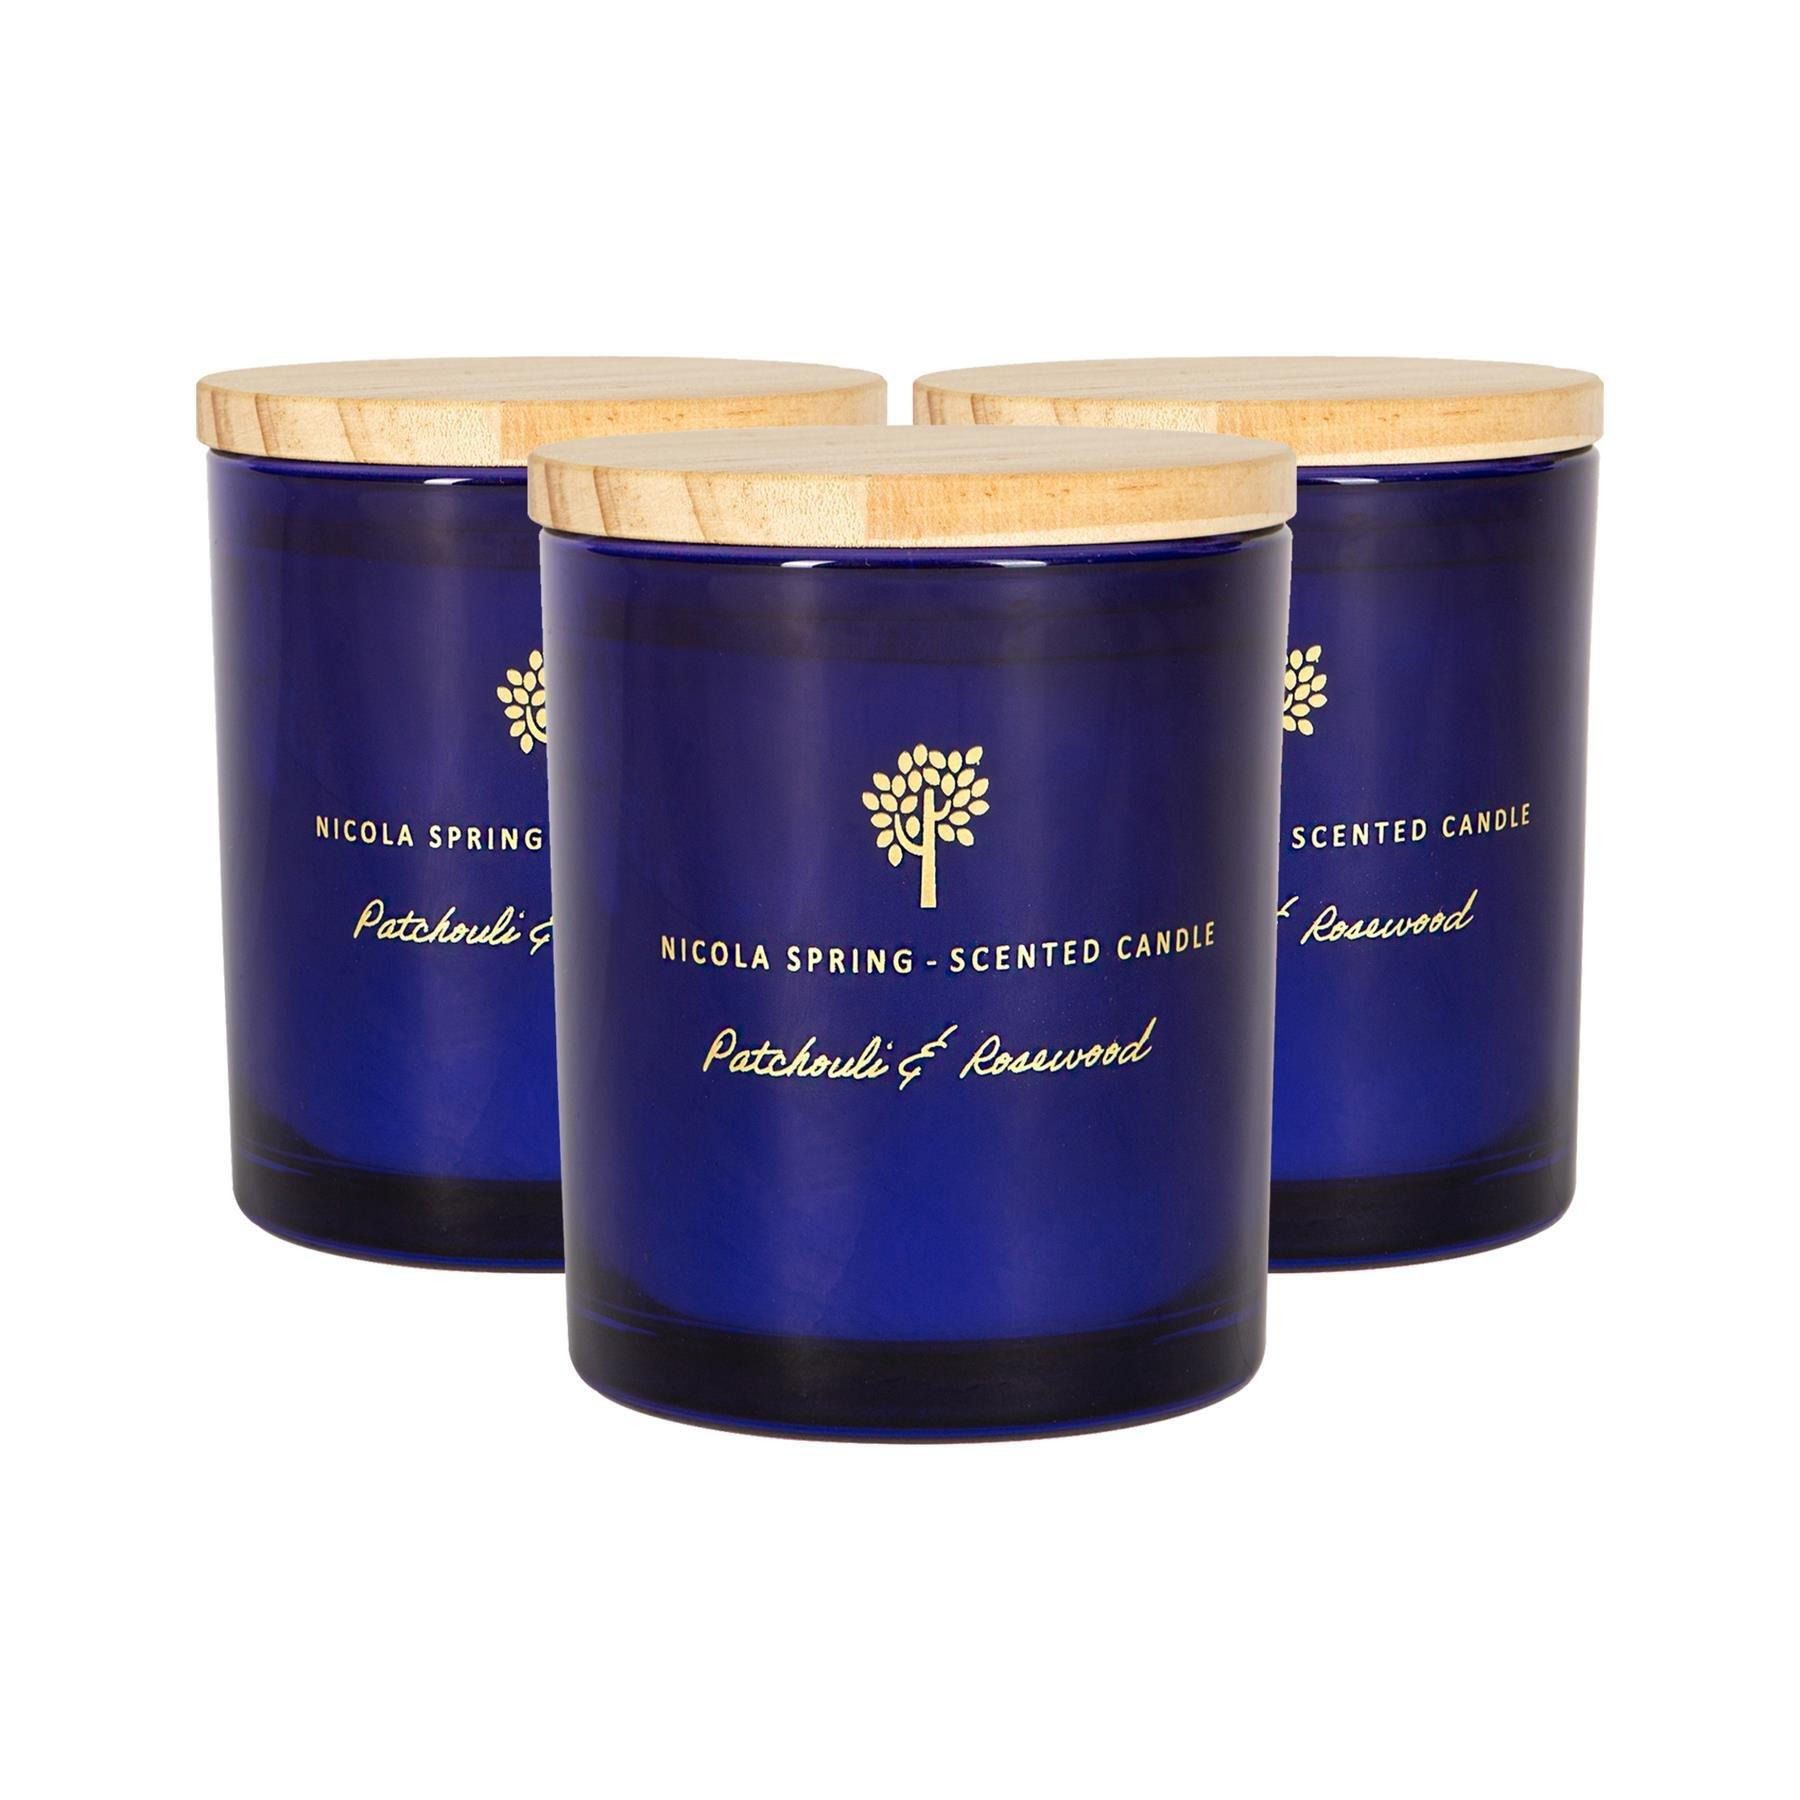 Soy Wax Scented Candles 130g Patchouli & Rosewood Pack of 3 - image 1